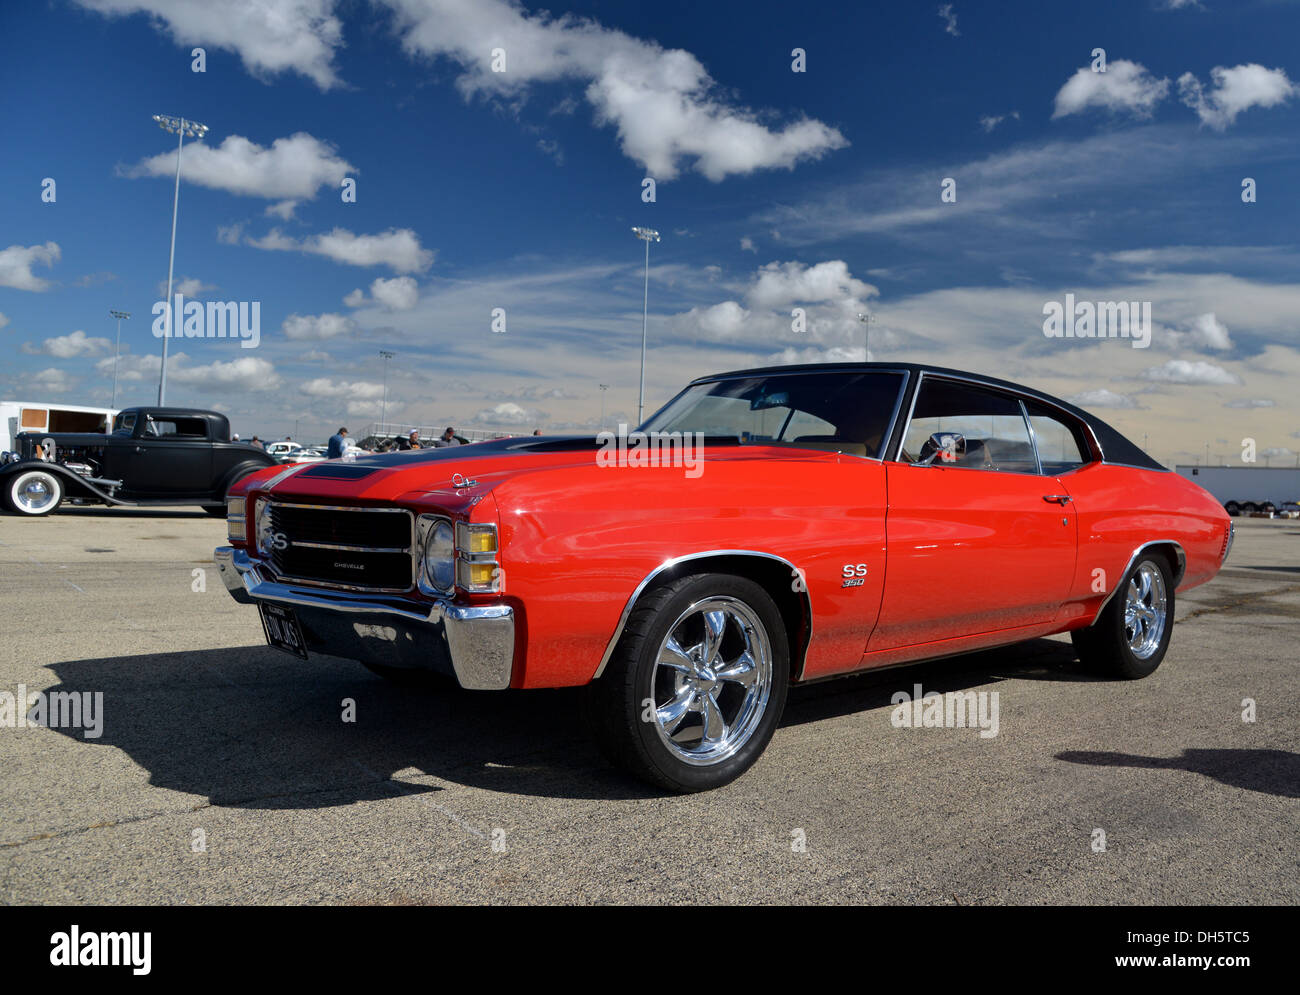 1970 Chevelle SS American muscle car Stock Photo